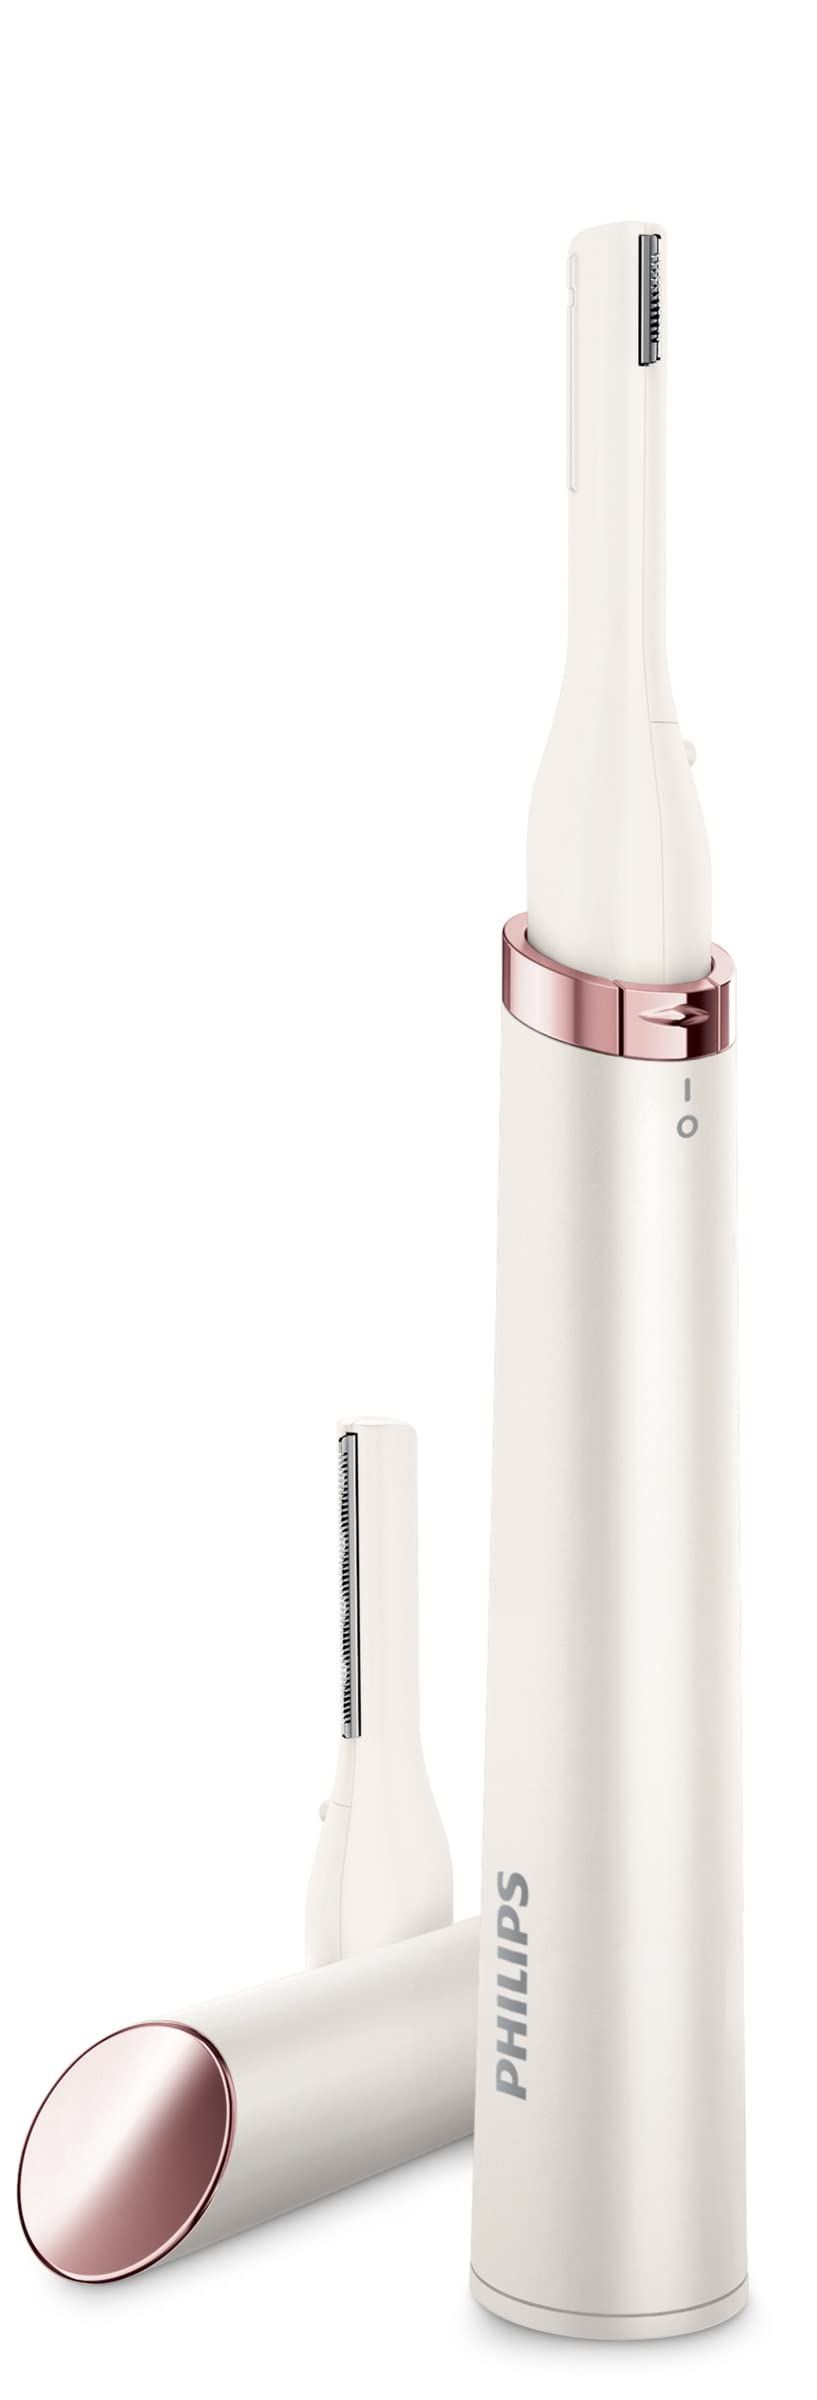 Philips SatinCompact Women's Precision Trimmer, Instant Hair Removal for Face & Eyebrows, Fine Body Hair (HP6389)